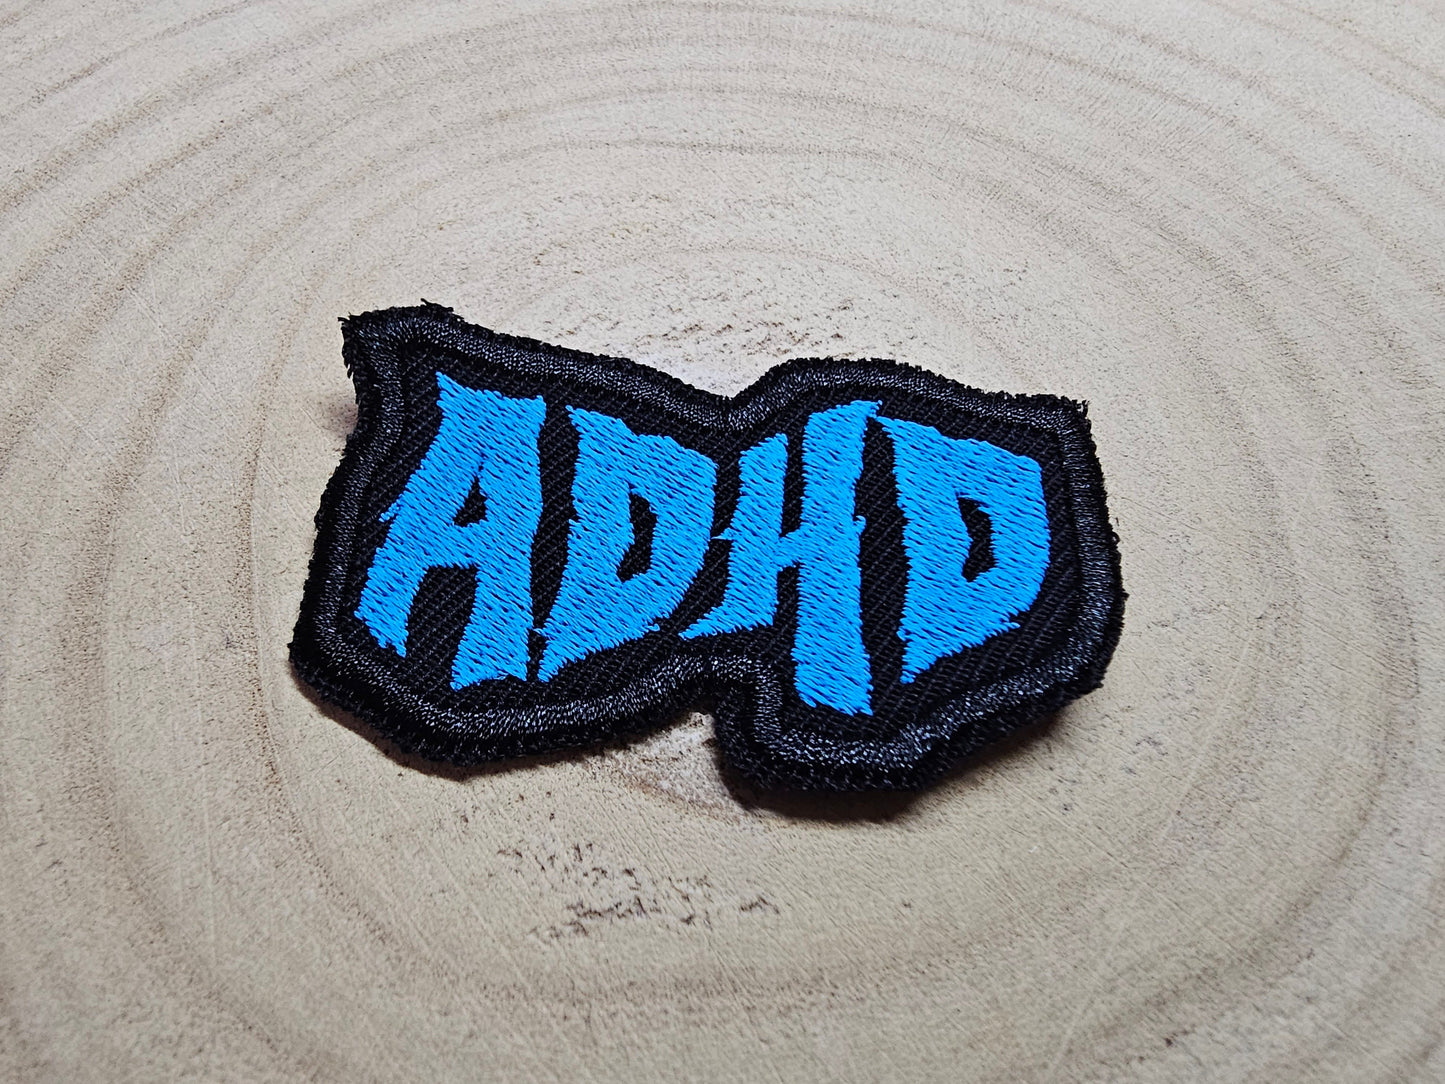 ADHD Blue Death Metal Iron On Embroidered Patch Neurodiversity ND Black Metal